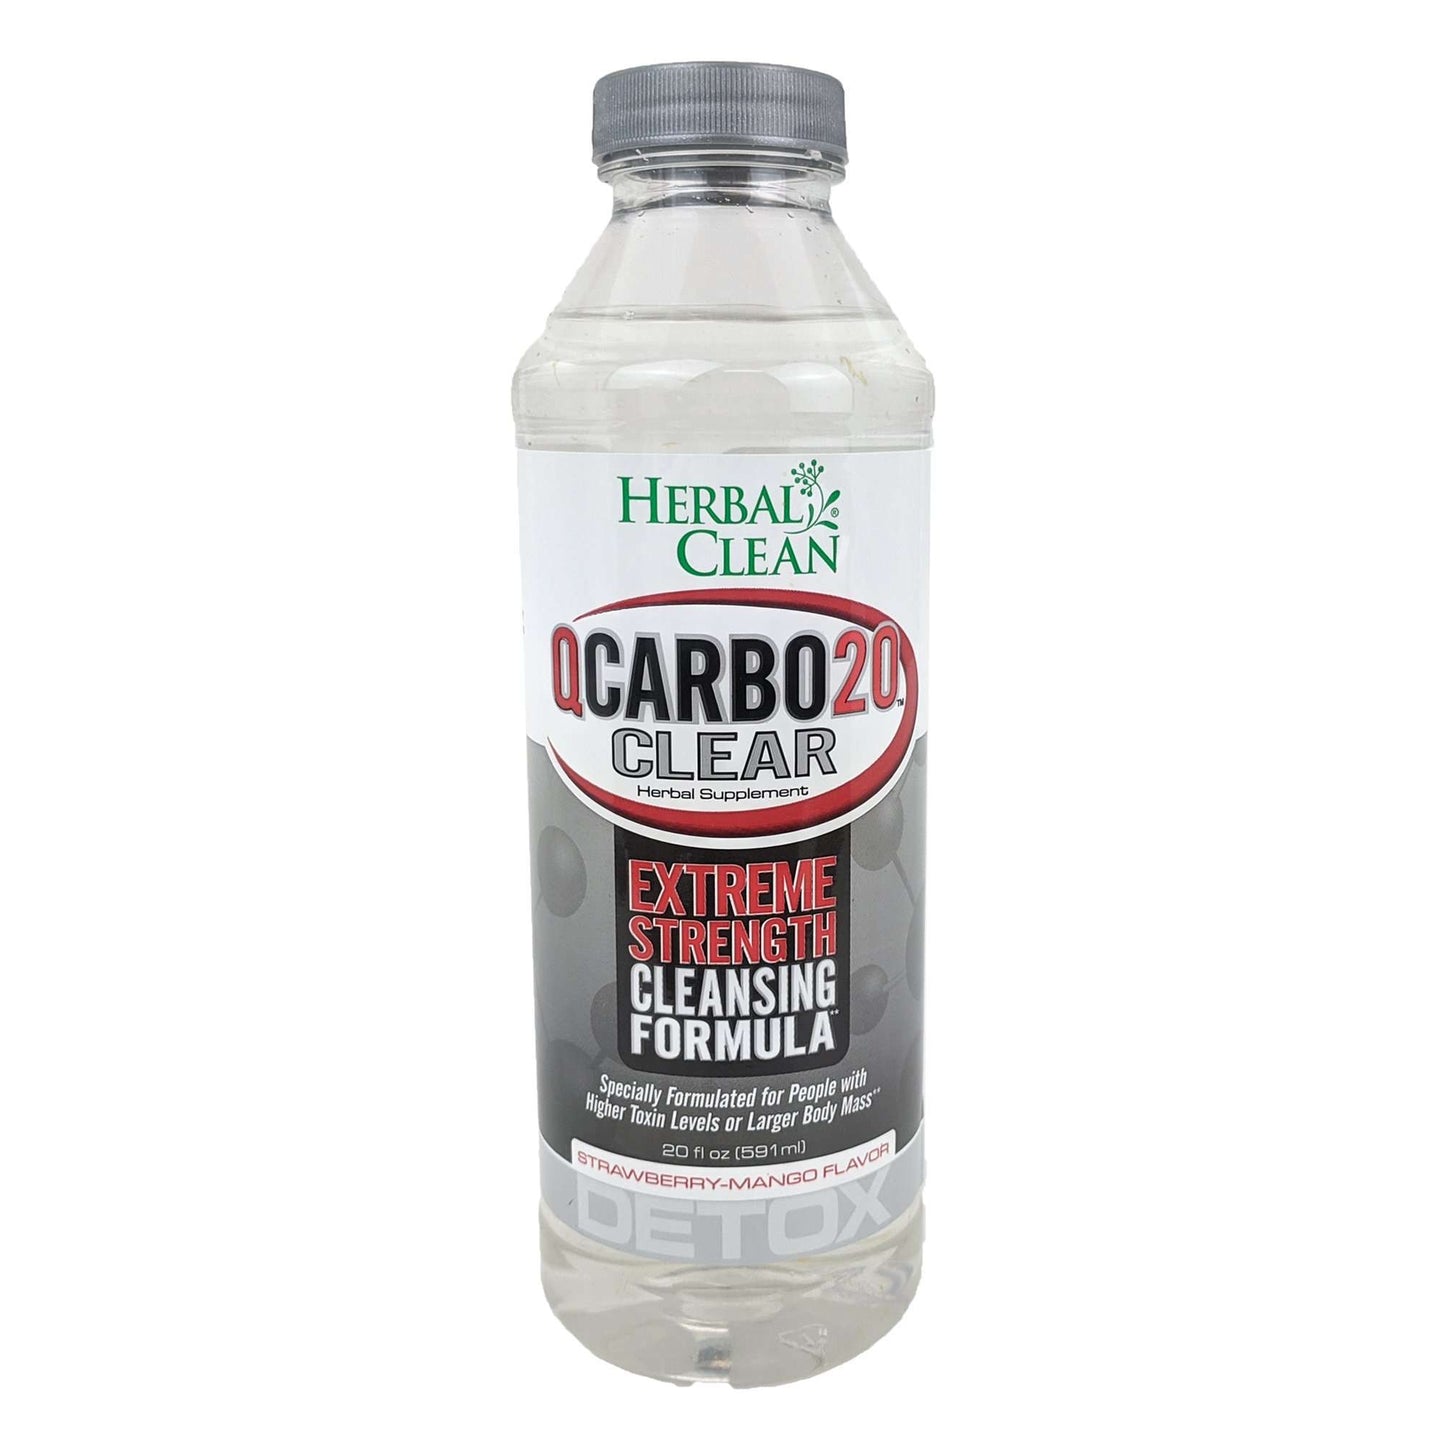 Herbal Clean Qcarbo20 Clear 20oz with 5 Tablets, Strawberry-Mango